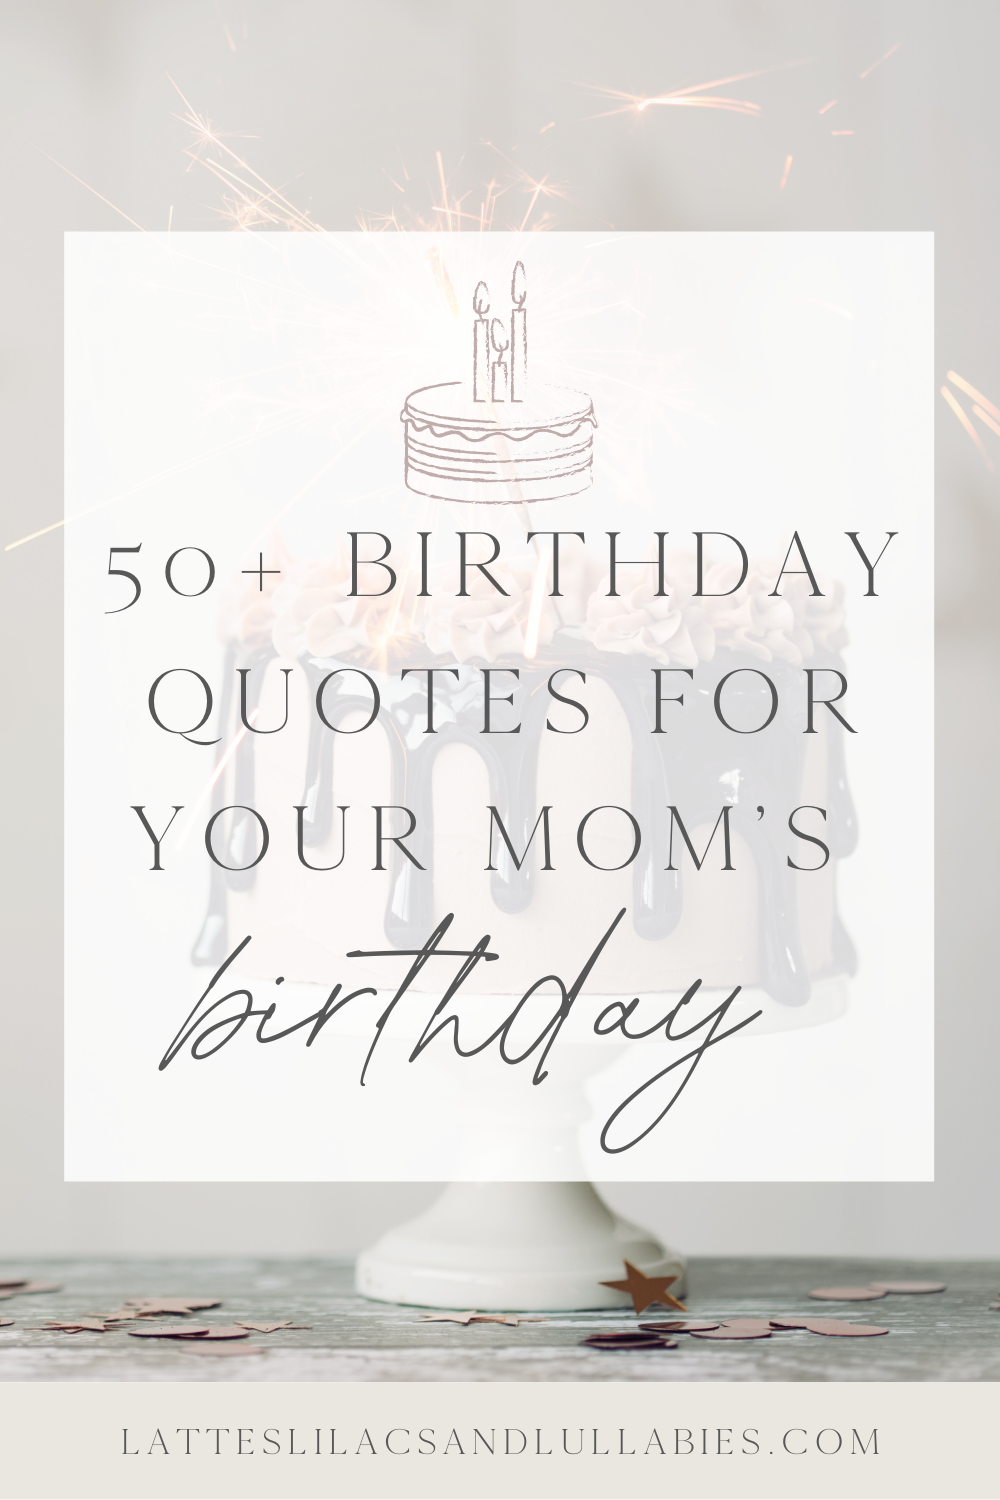 50+ Happy Birthday Mom Quotes: The Best Tips and Tricks for a Meaningful Celebration